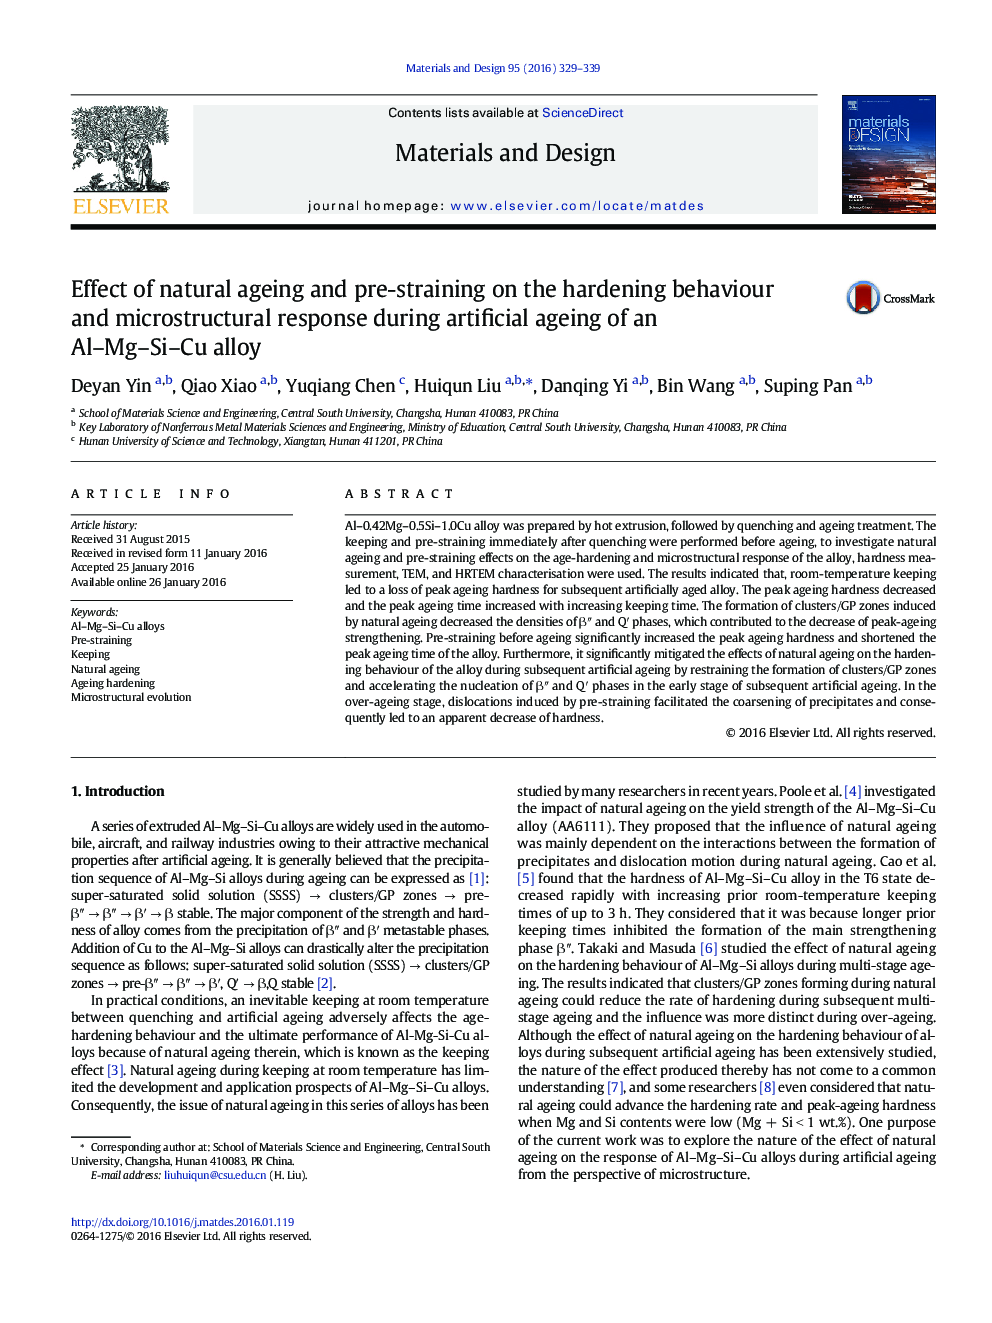 Effect of natural ageing and pre-straining on the hardening behaviour and microstructural response during artificial ageing of an Al-Mg-Si-Cu alloy